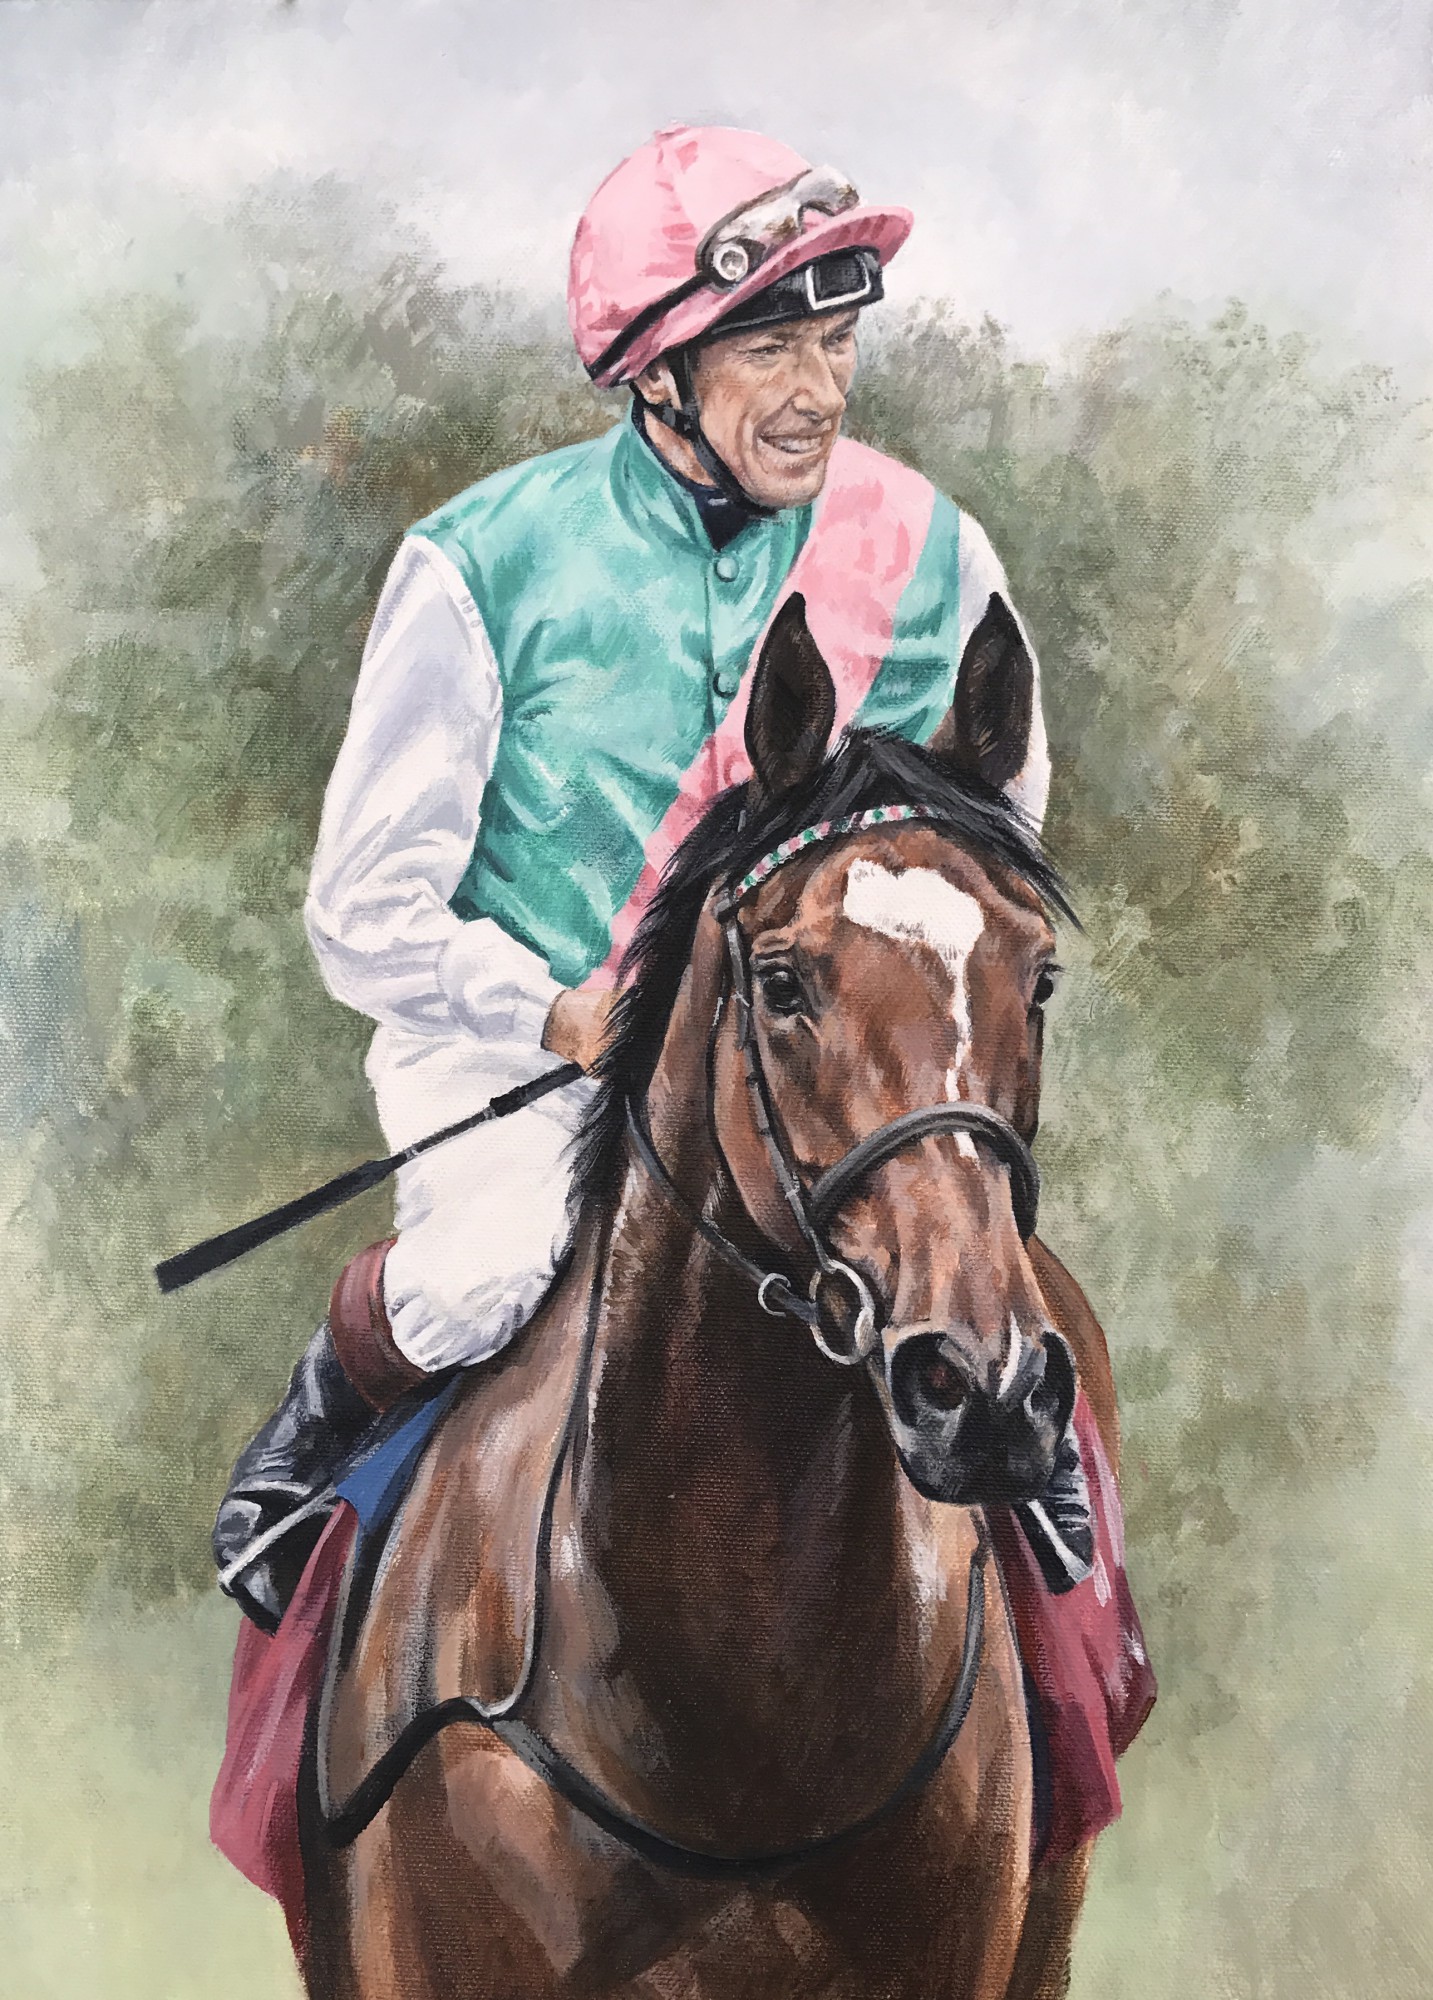 ENABLE Limited Edition Horse racing Print